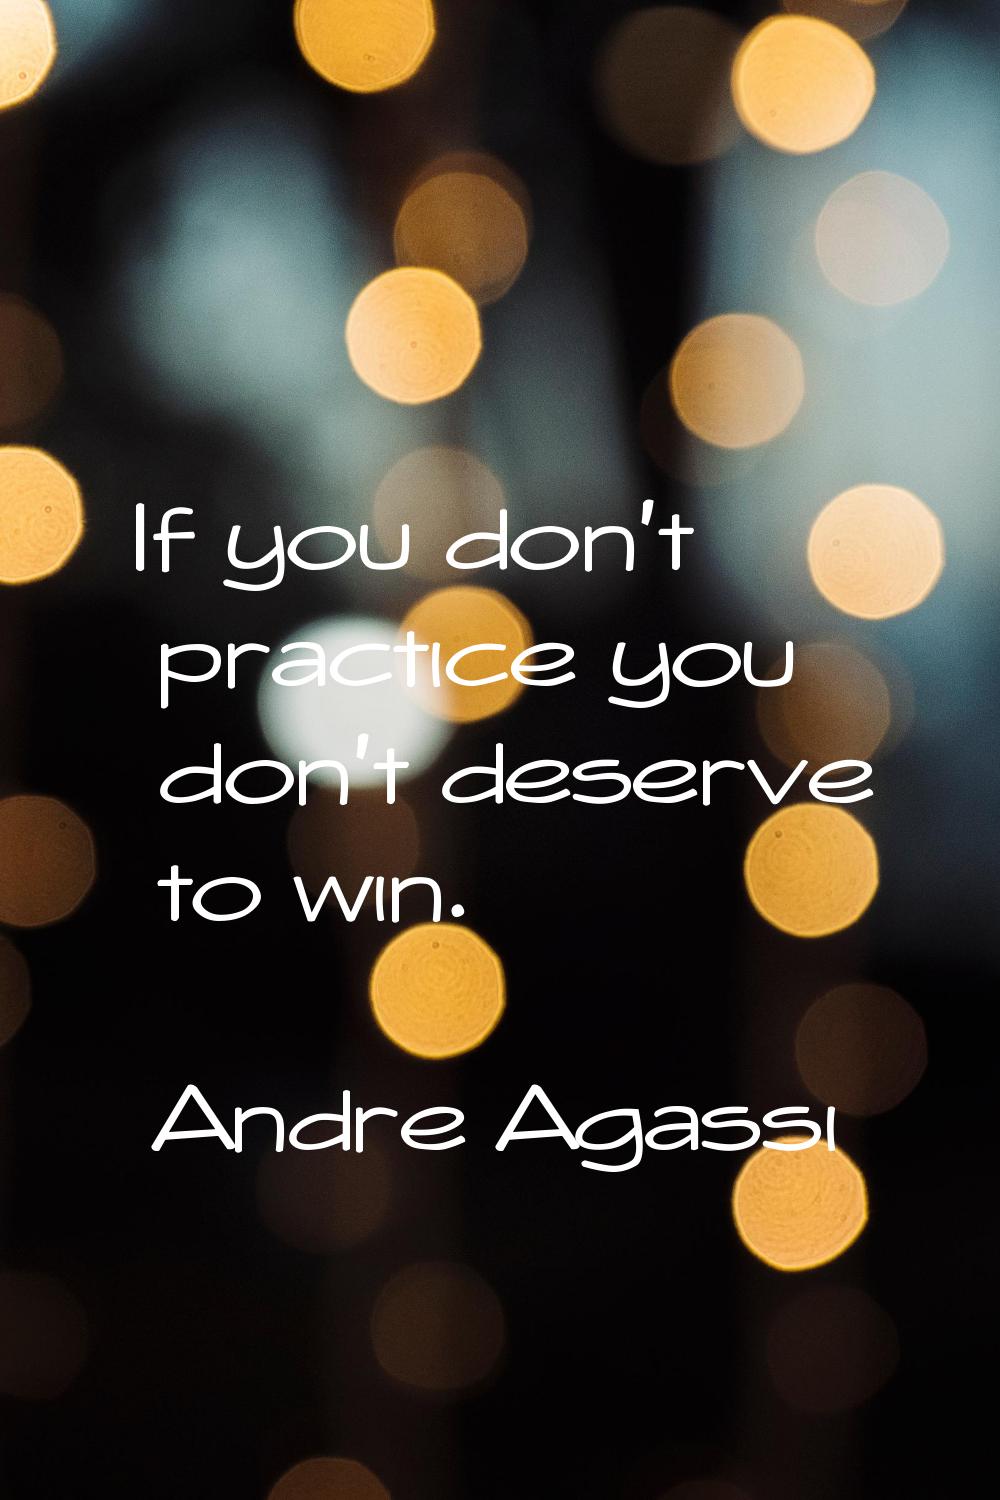 If you don't practice you don't deserve to win.